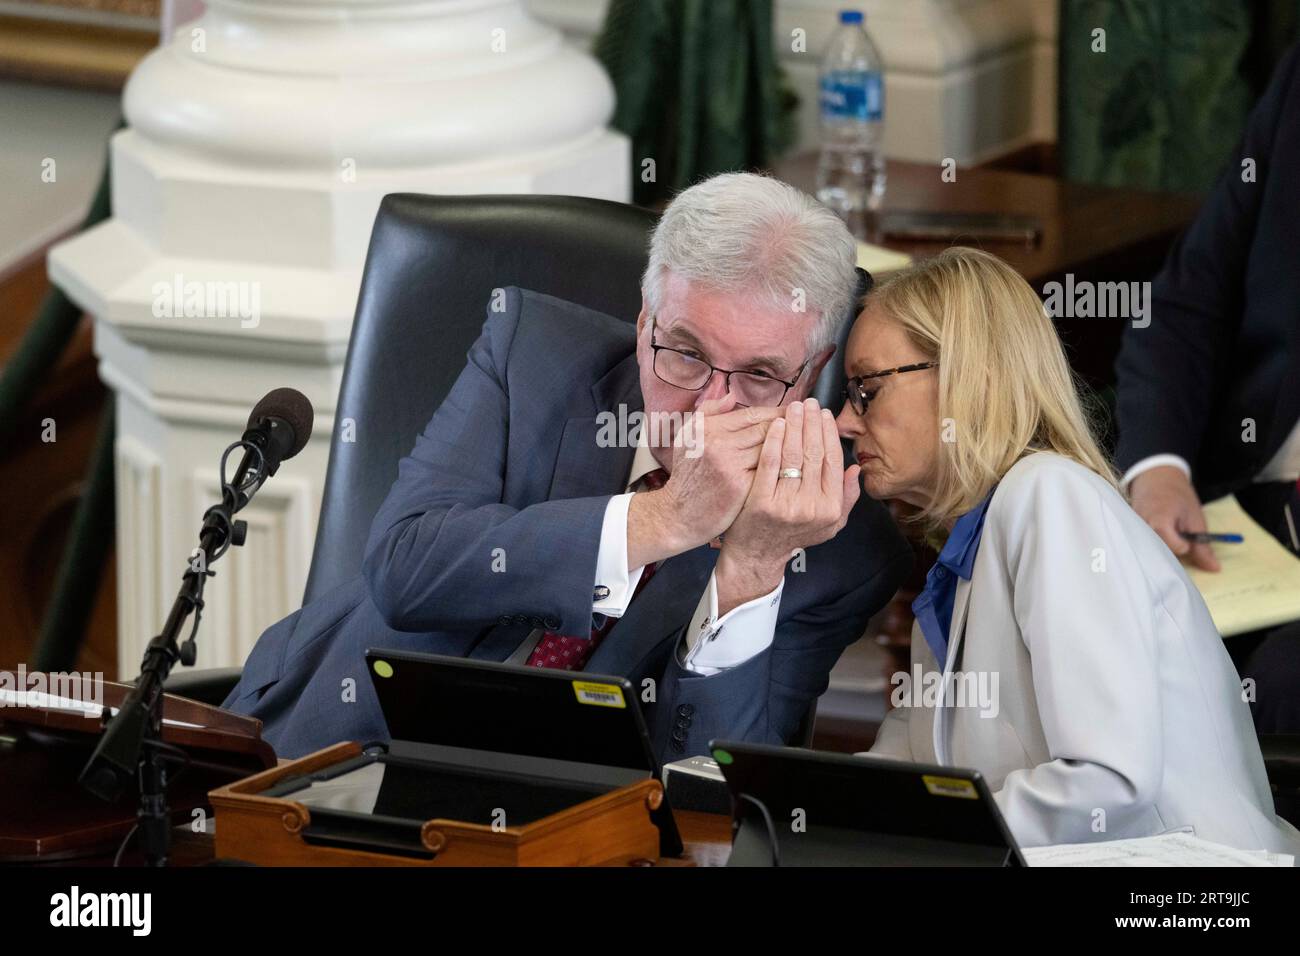 Austin, Texas, USA, September 11 2023: Texas Lt. Gov DAN PATRICK (left) and legal counsel LANA MYERS whisper during a ruling on day 5 of suspended Texas Attorney General Ken Paxton's impeachment trial in the Texas Senate. Patrick, who is not an attorney, is serving as the trial judge, with help from Myers, a retired district court judge. Credit: Bob Daemmrich/Alamy Live News Stock Photo